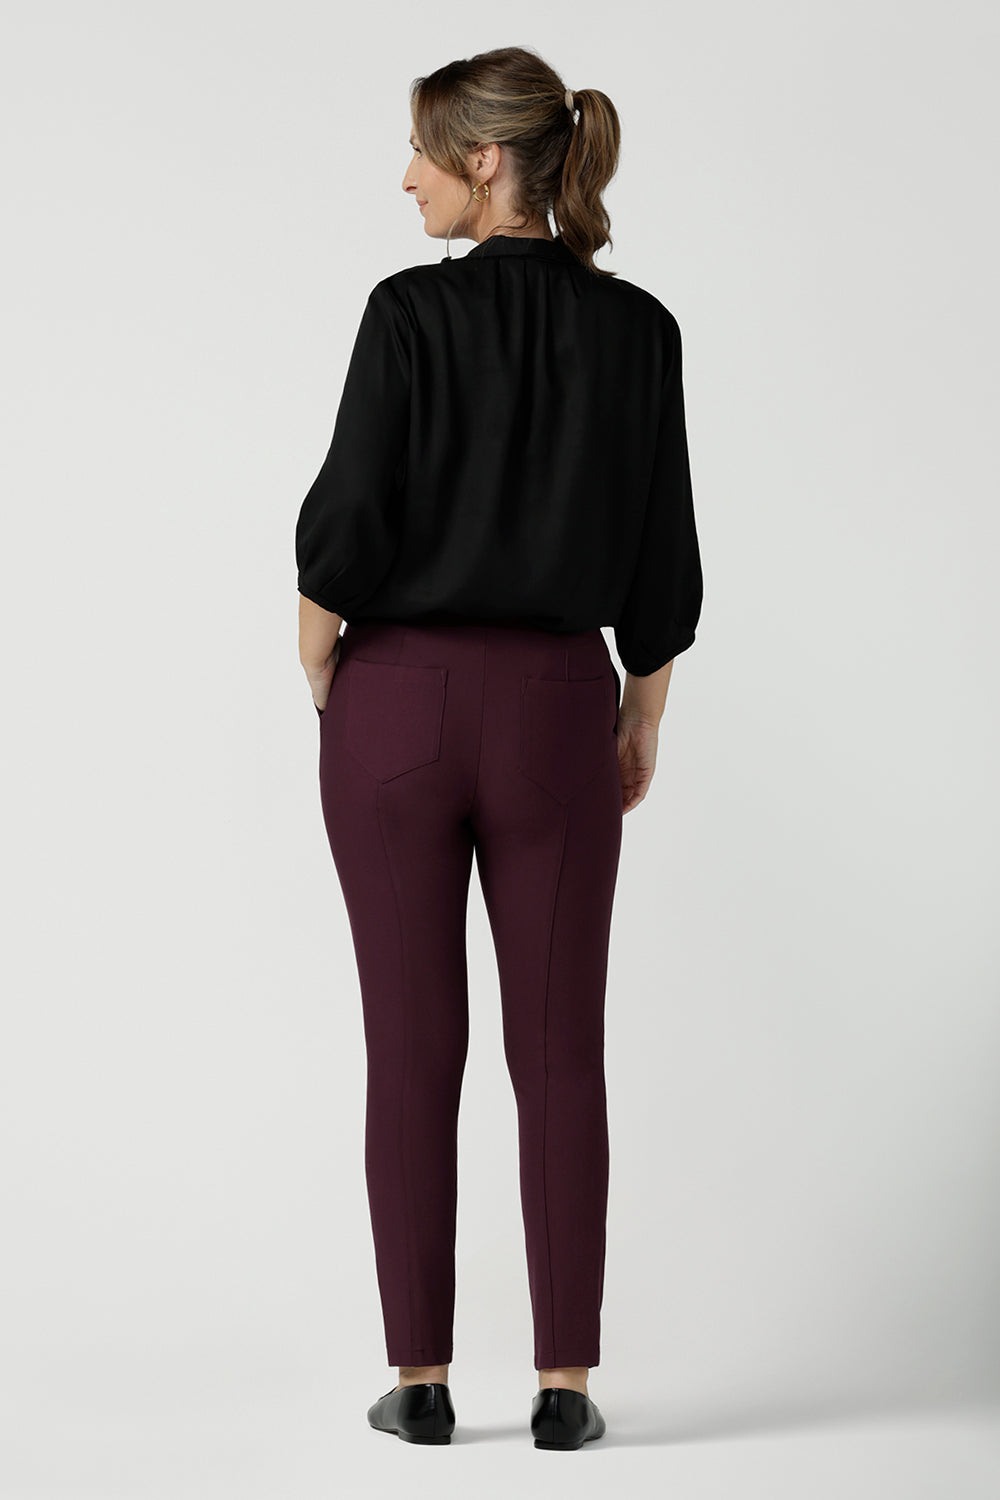 Back view of a size 10, forty plus woman wearing slim leg, cropped length, stretch pants in Mulberry ponte jersey and a 3/4 sleeve pull-on black shirt. Made in Australia by Australian and New Zealand women's clothing brand, L&F, these easy care pants work for corporate wear and weekend wear.